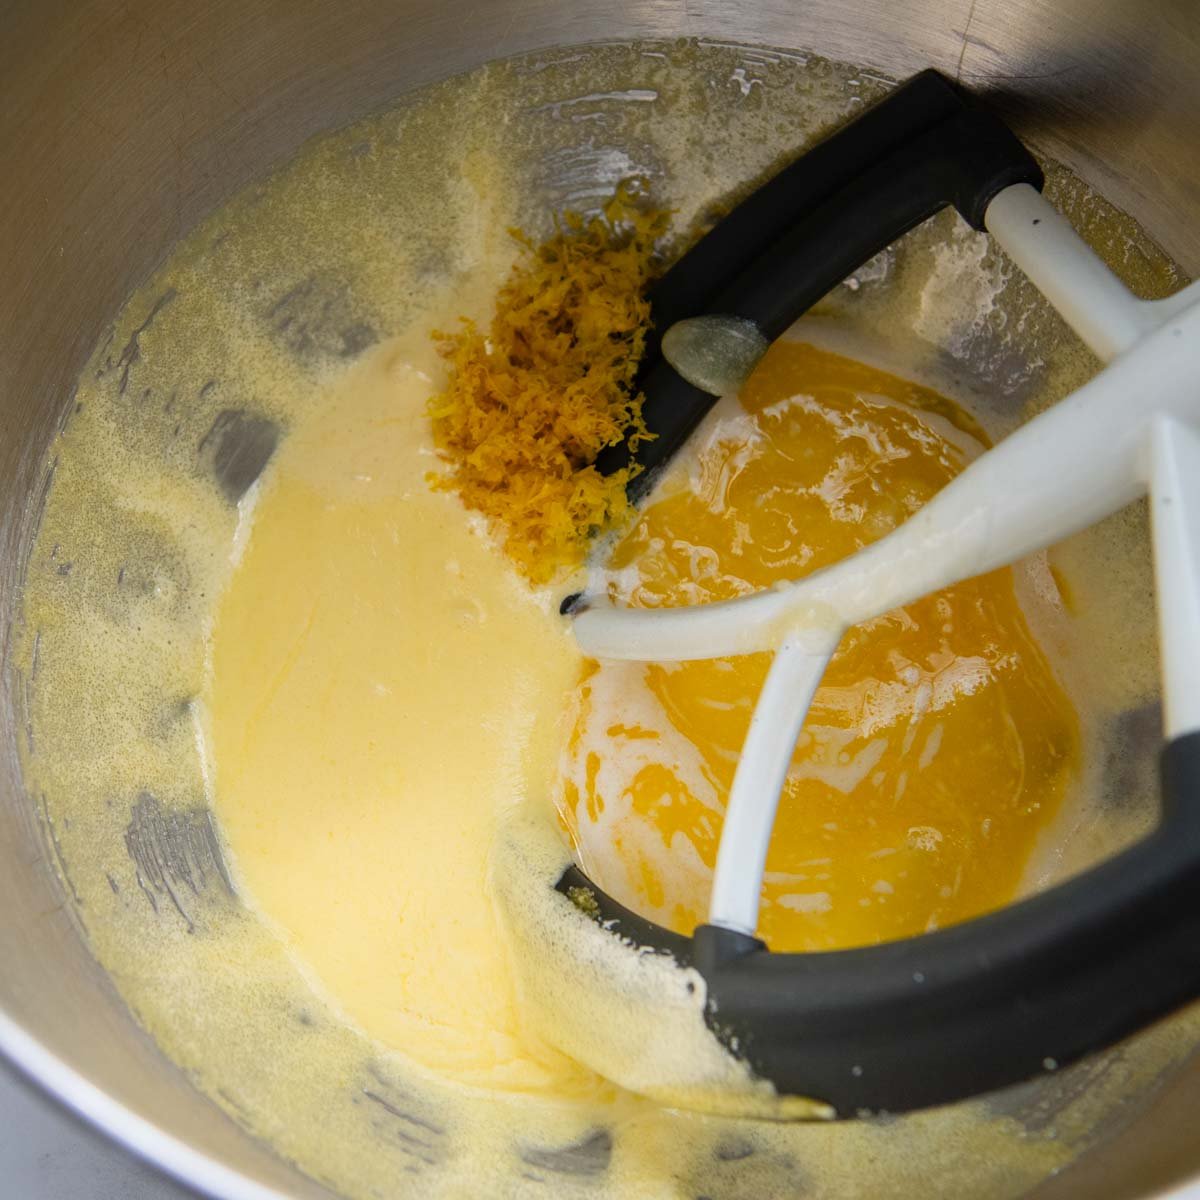 the egg yolks after being mixed with sugar.